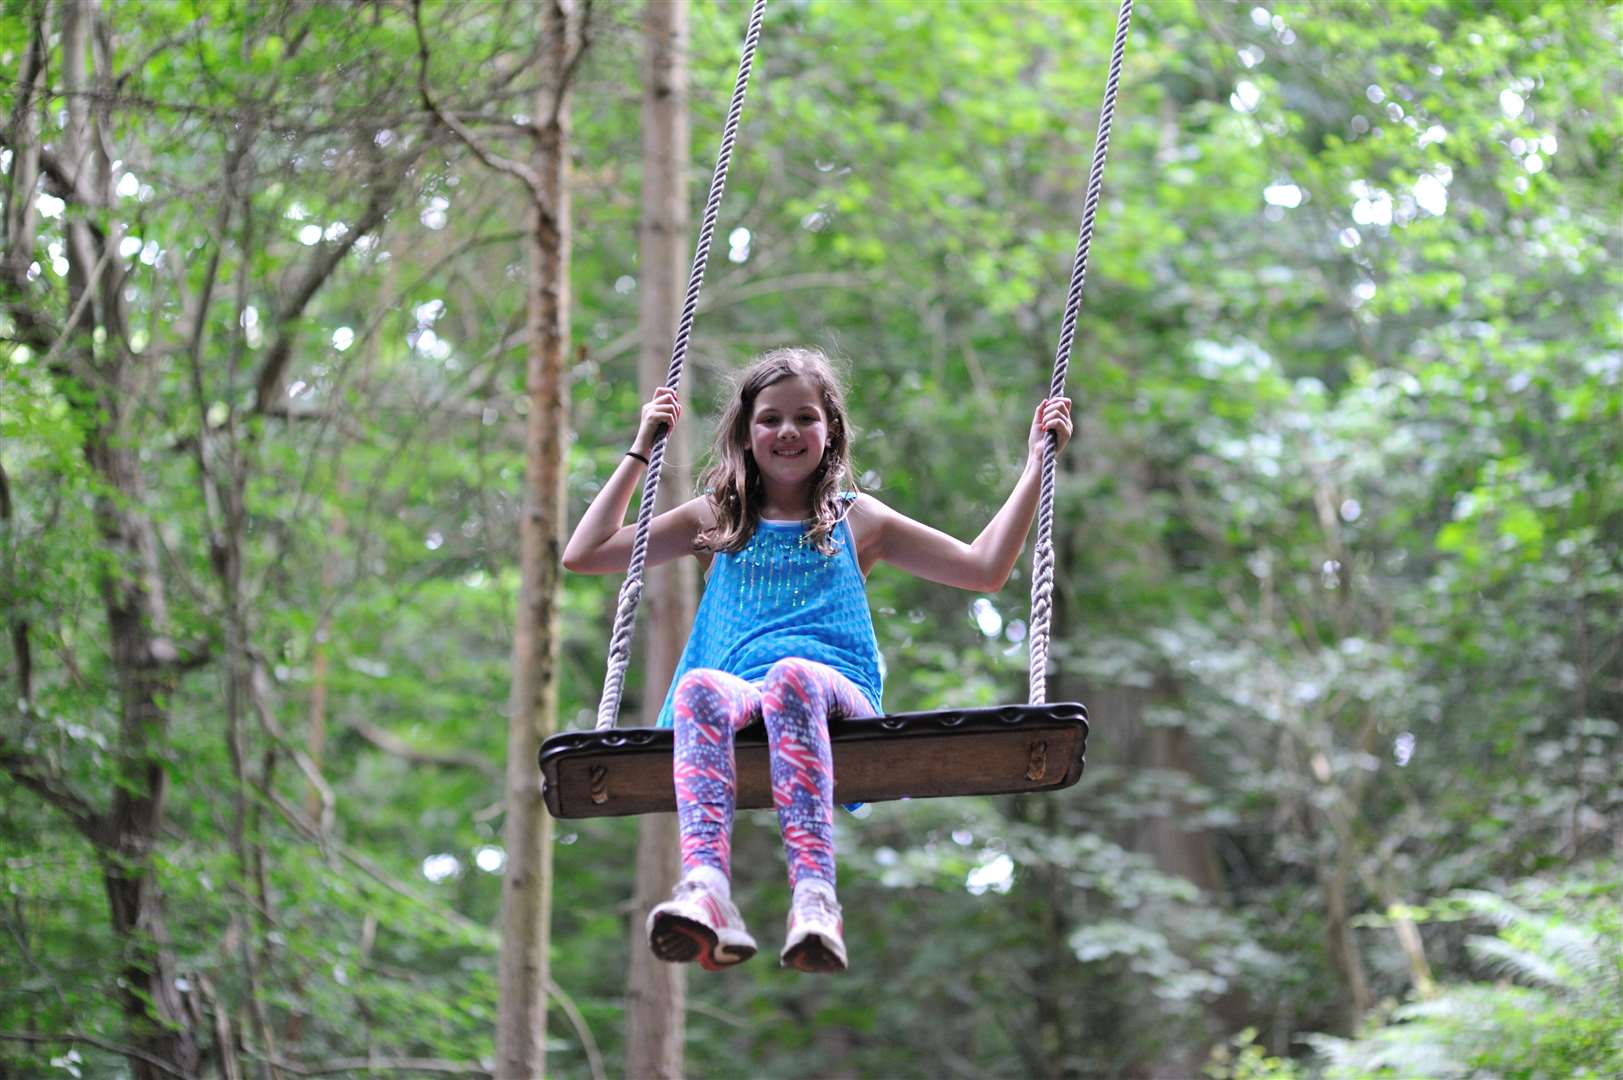 You'll find rope swings in the Enchanted Forest